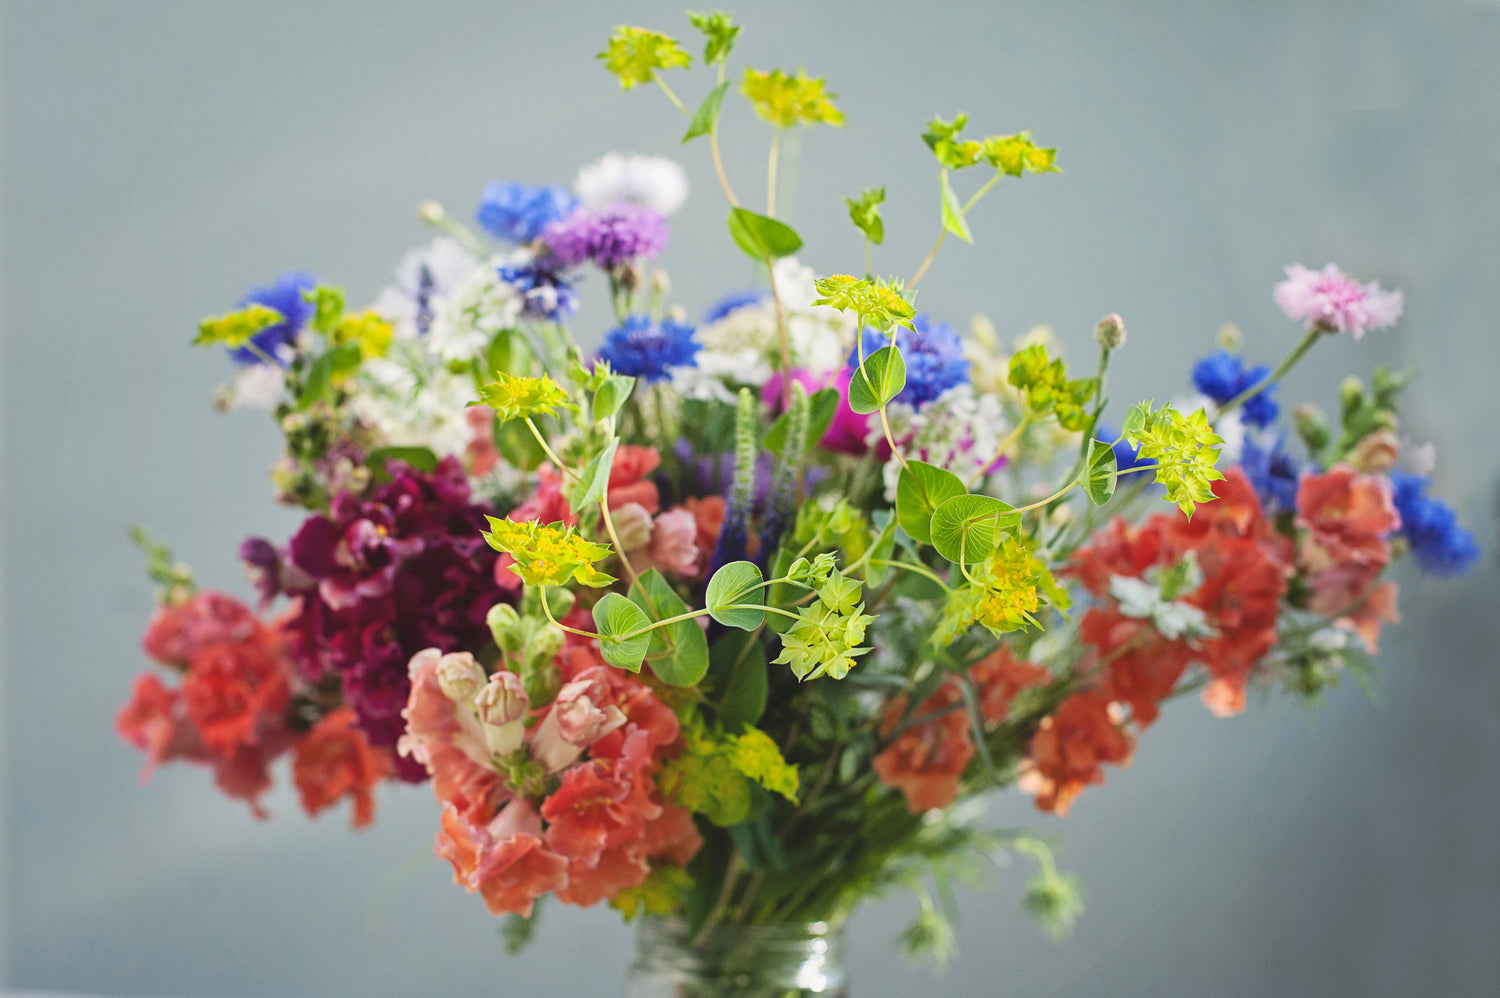 Bouquet of spring flowers including bachelors buttons, bupleurum, snapdragons, and stock